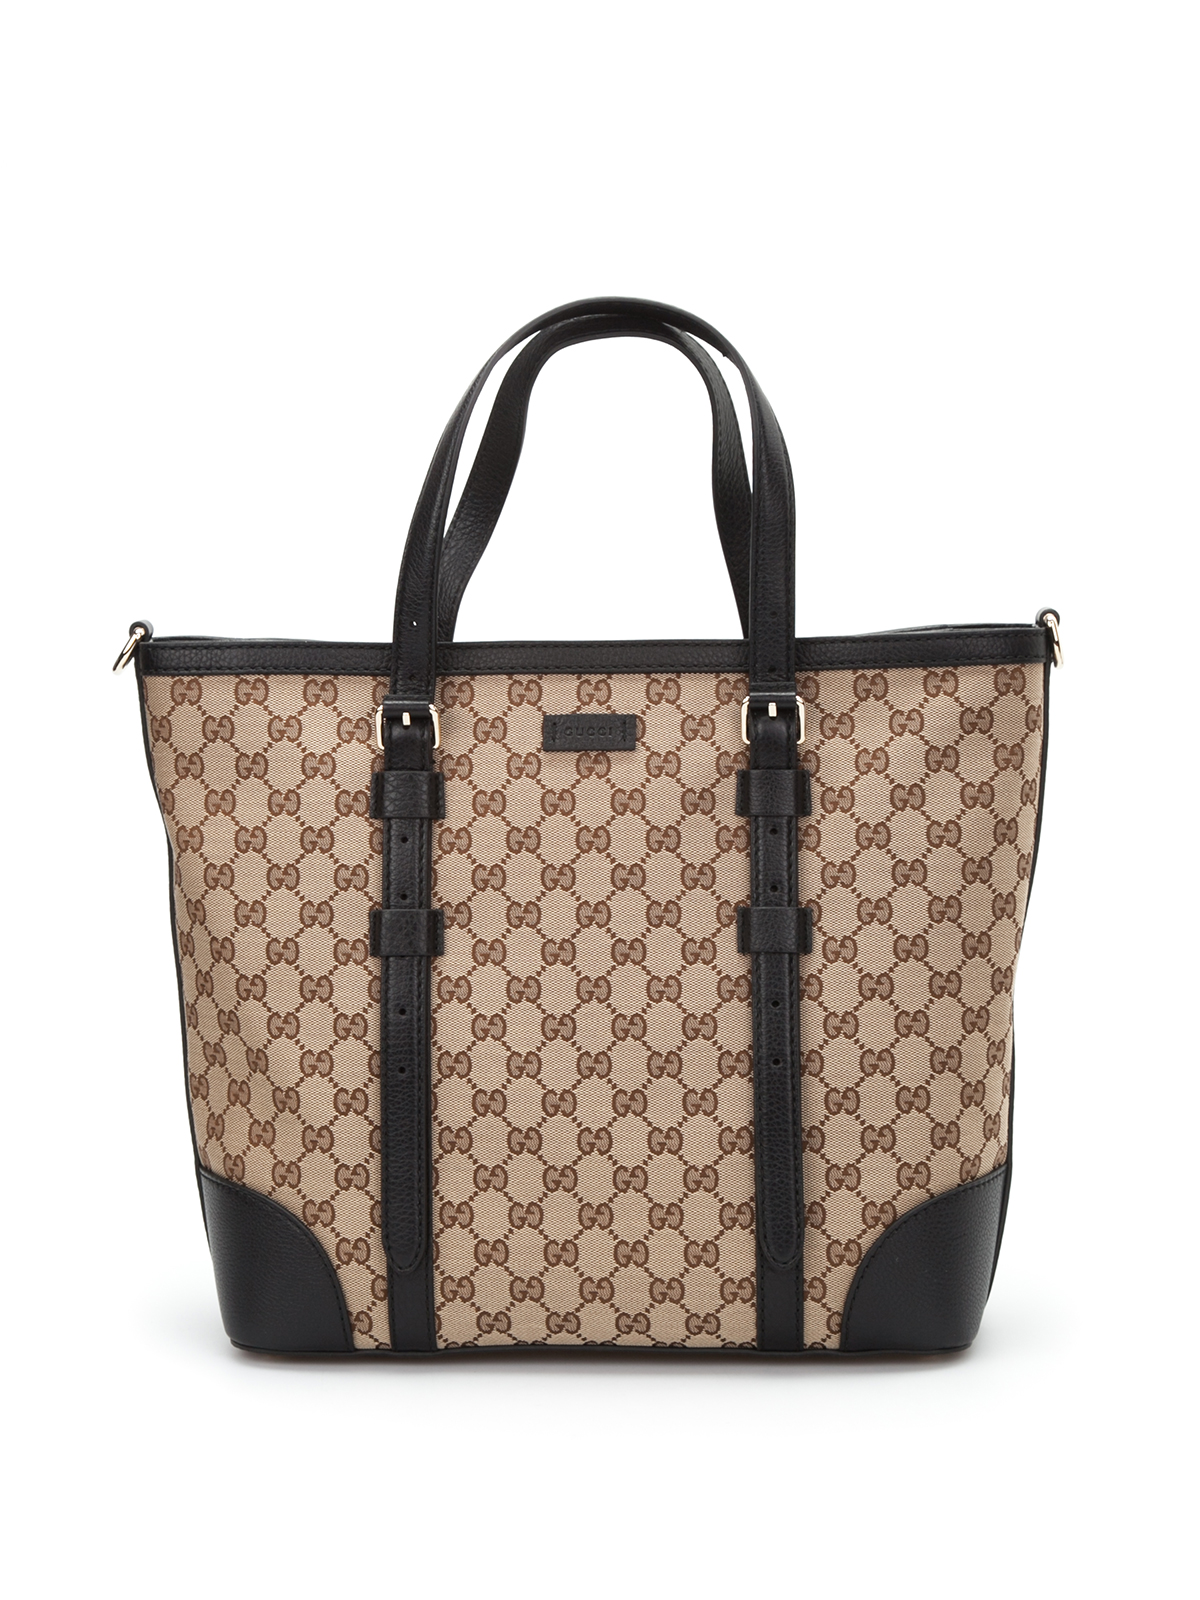 Gucci - GG classic tote - totes bags - 387602KQW1G9769 | literacybasics.ca